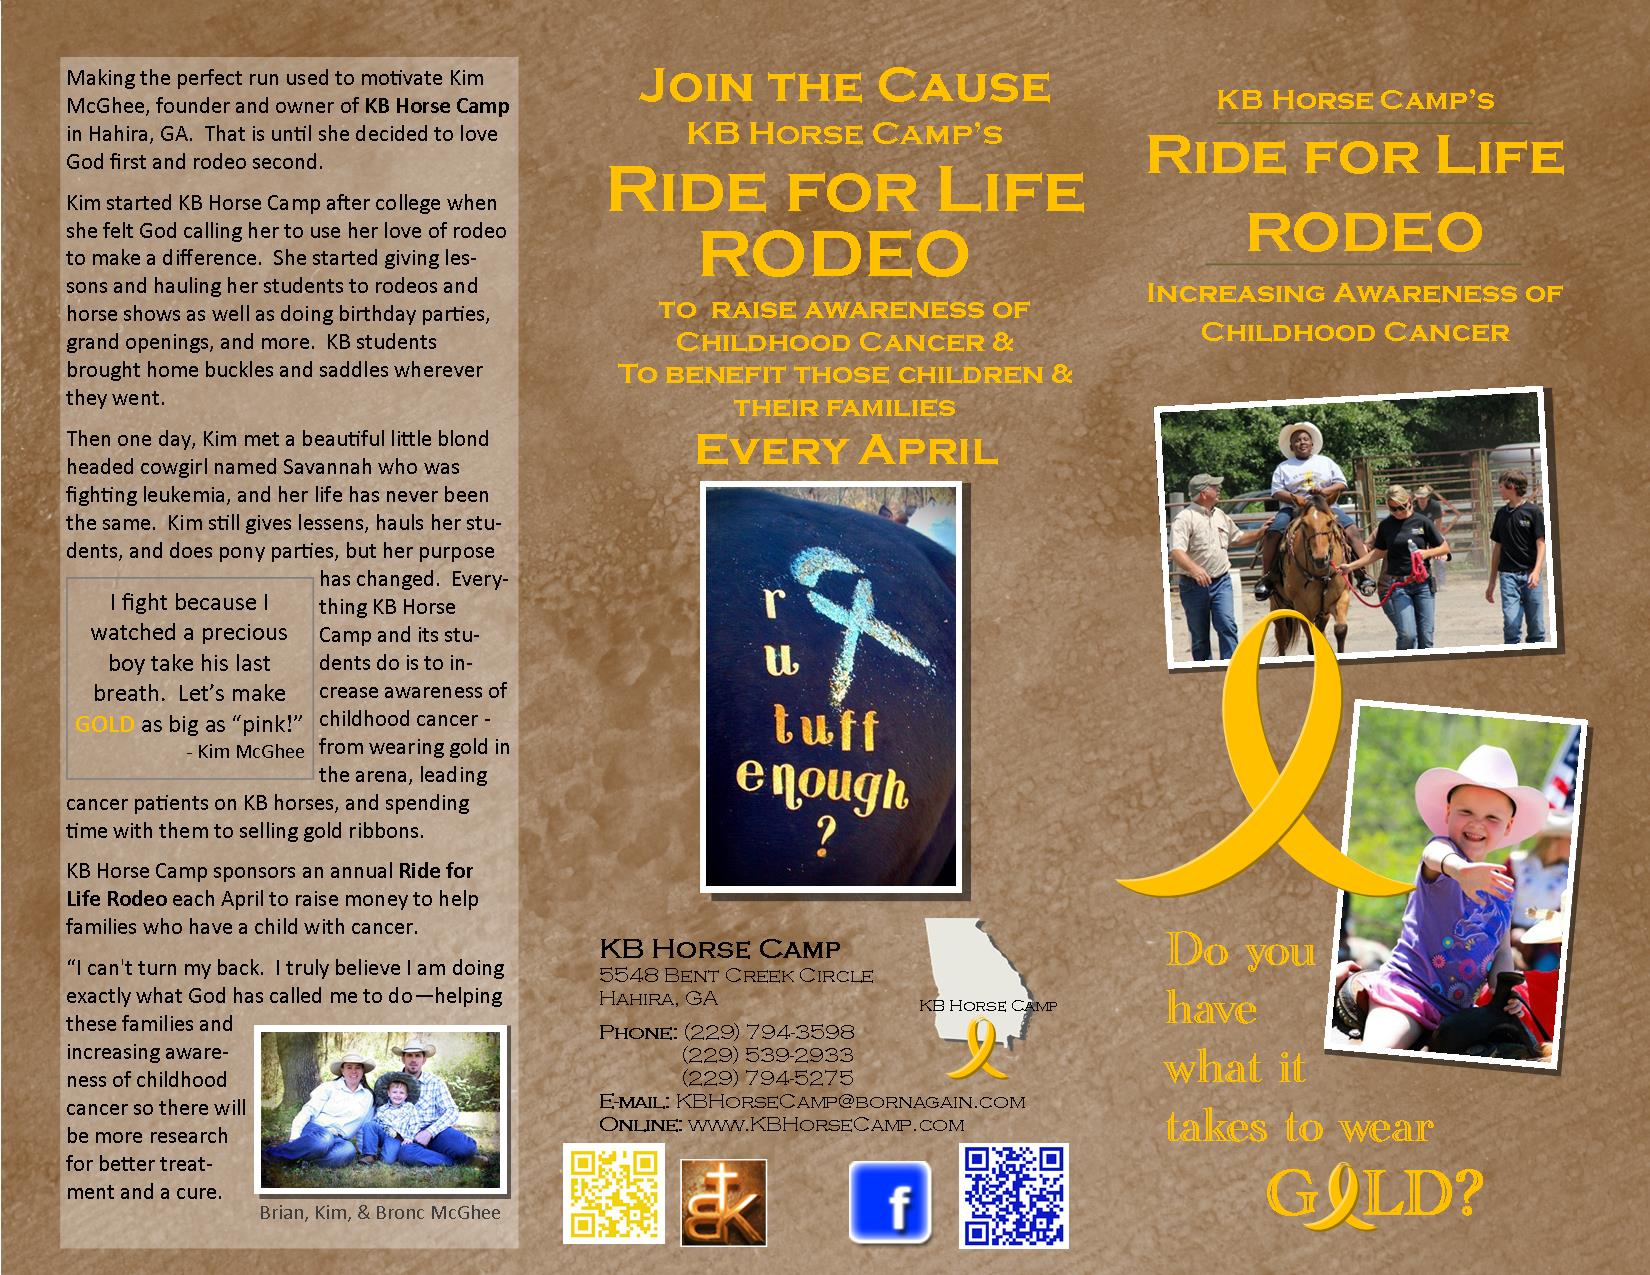 Ride for Life Rodeo